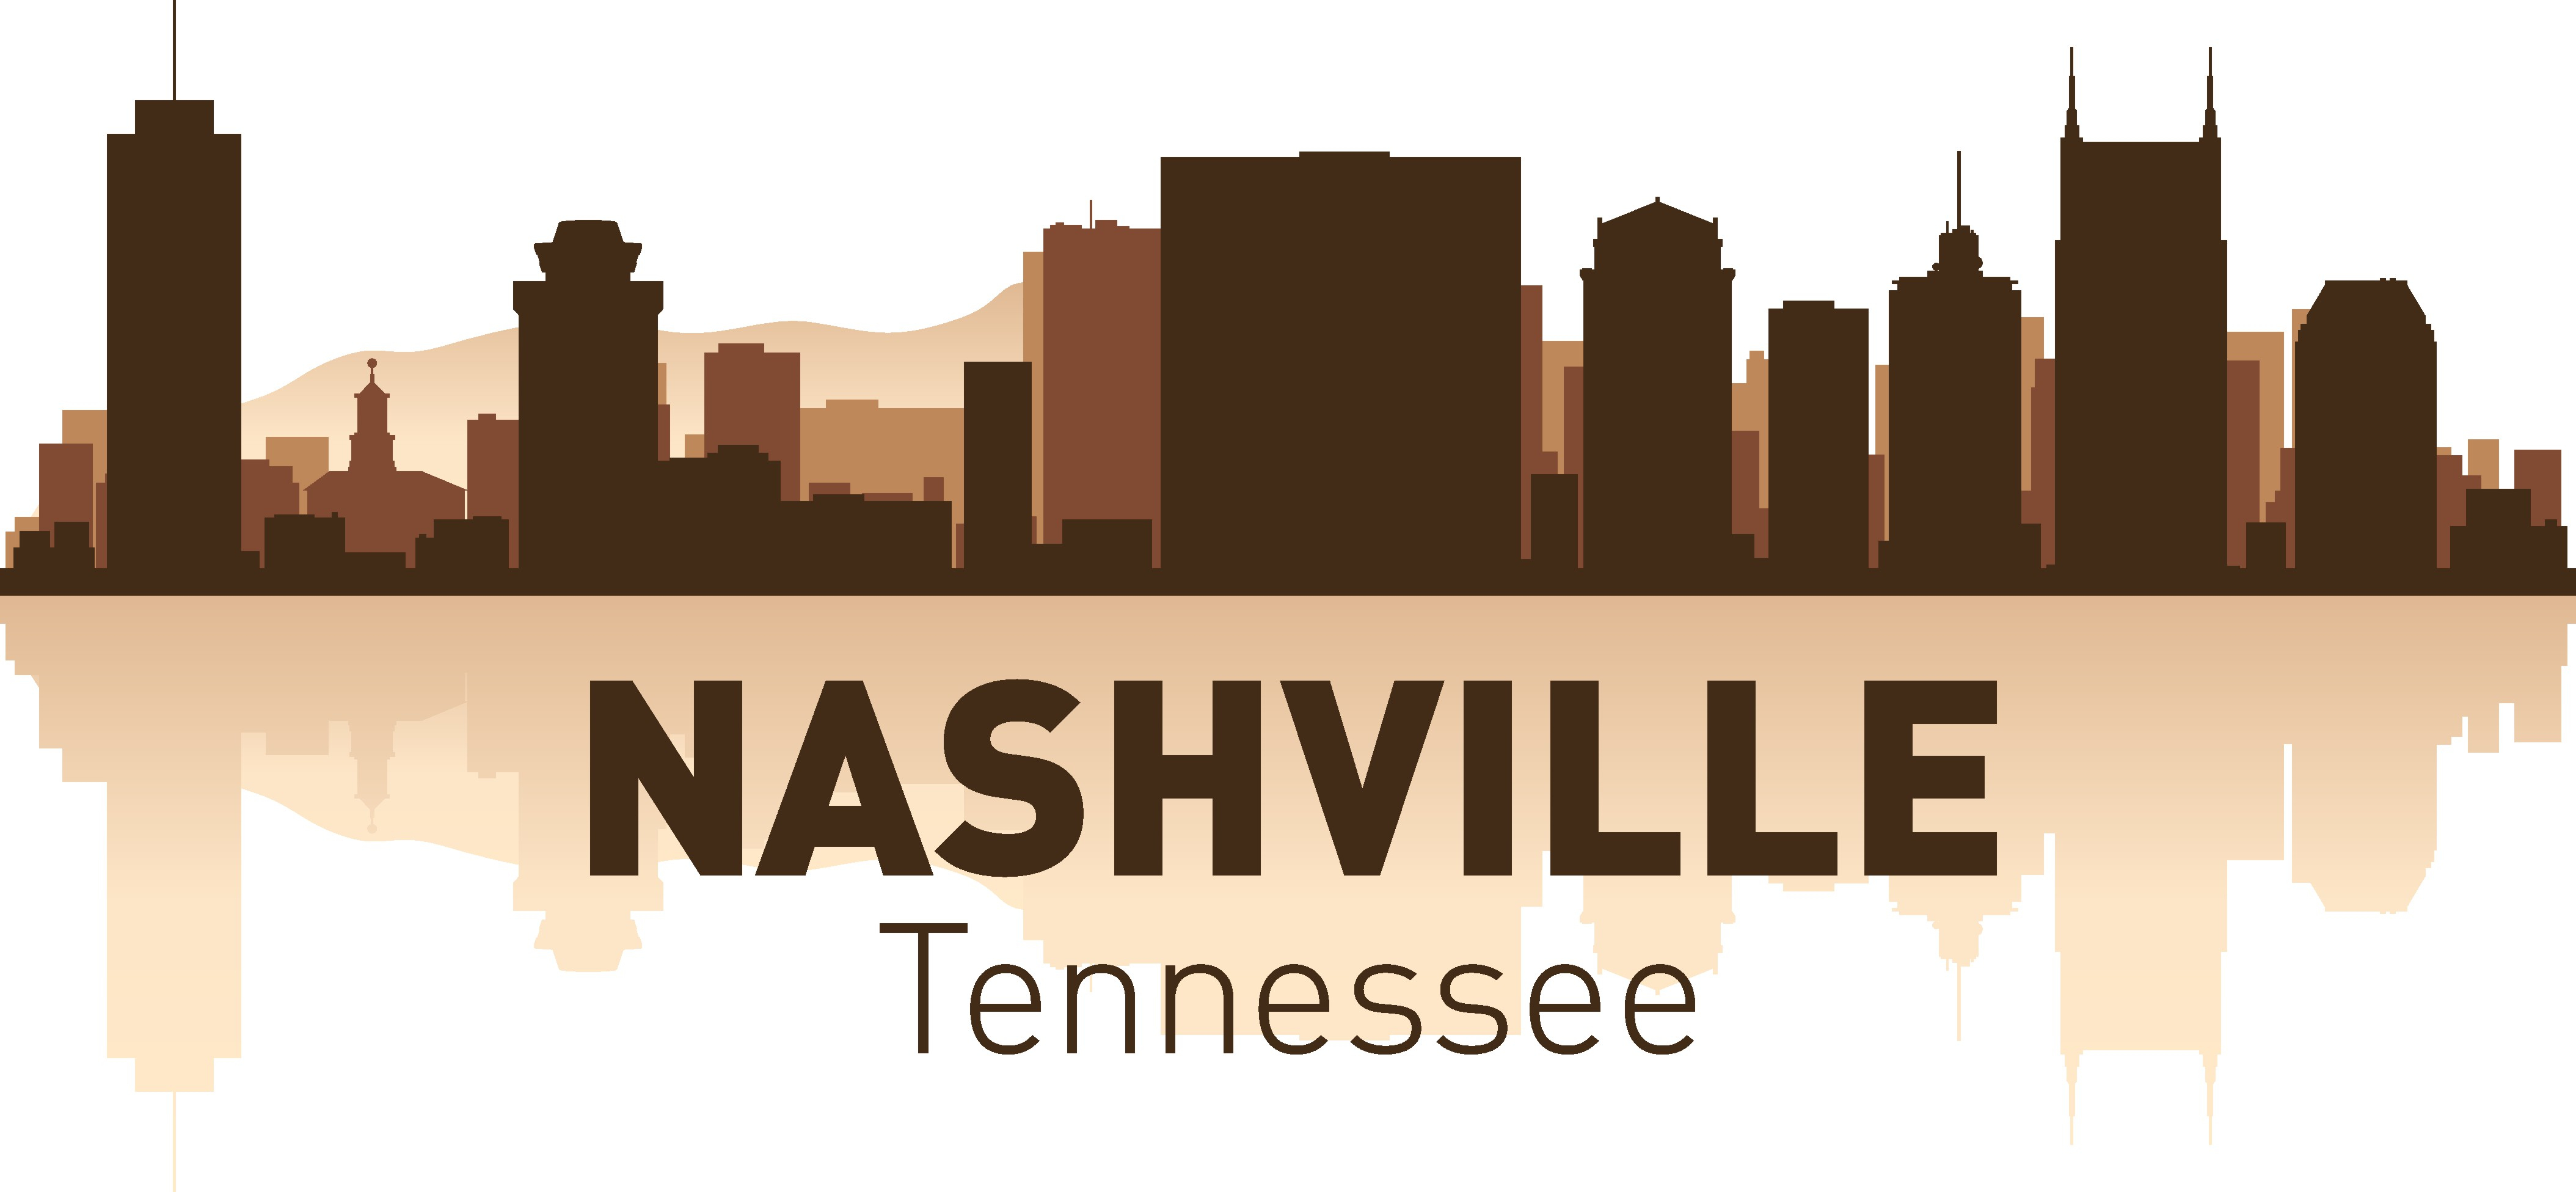 Nashville Skyline Free Vector cdr Download 3axis.co